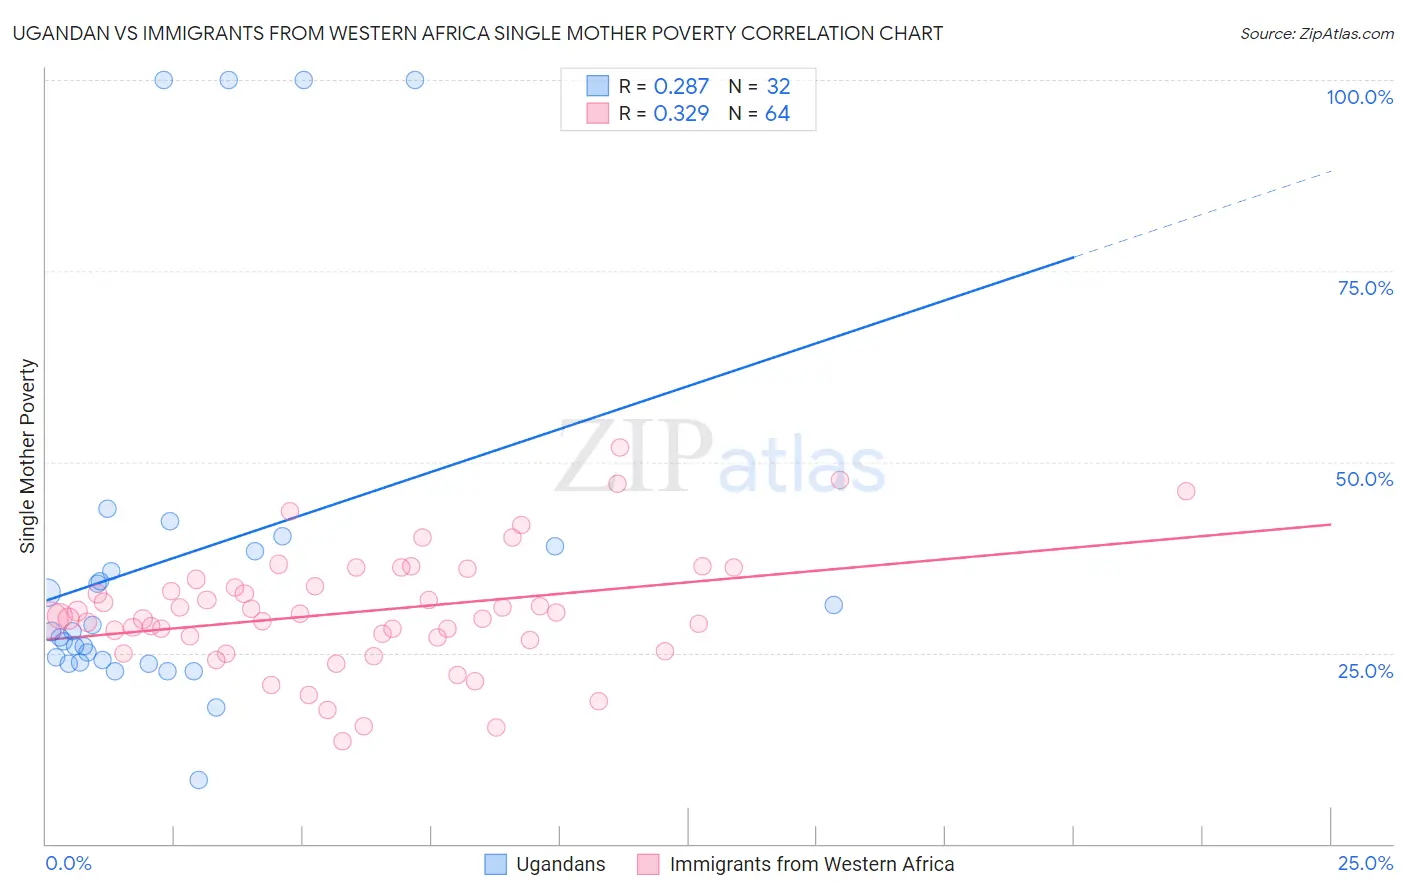 Ugandan vs Immigrants from Western Africa Single Mother Poverty